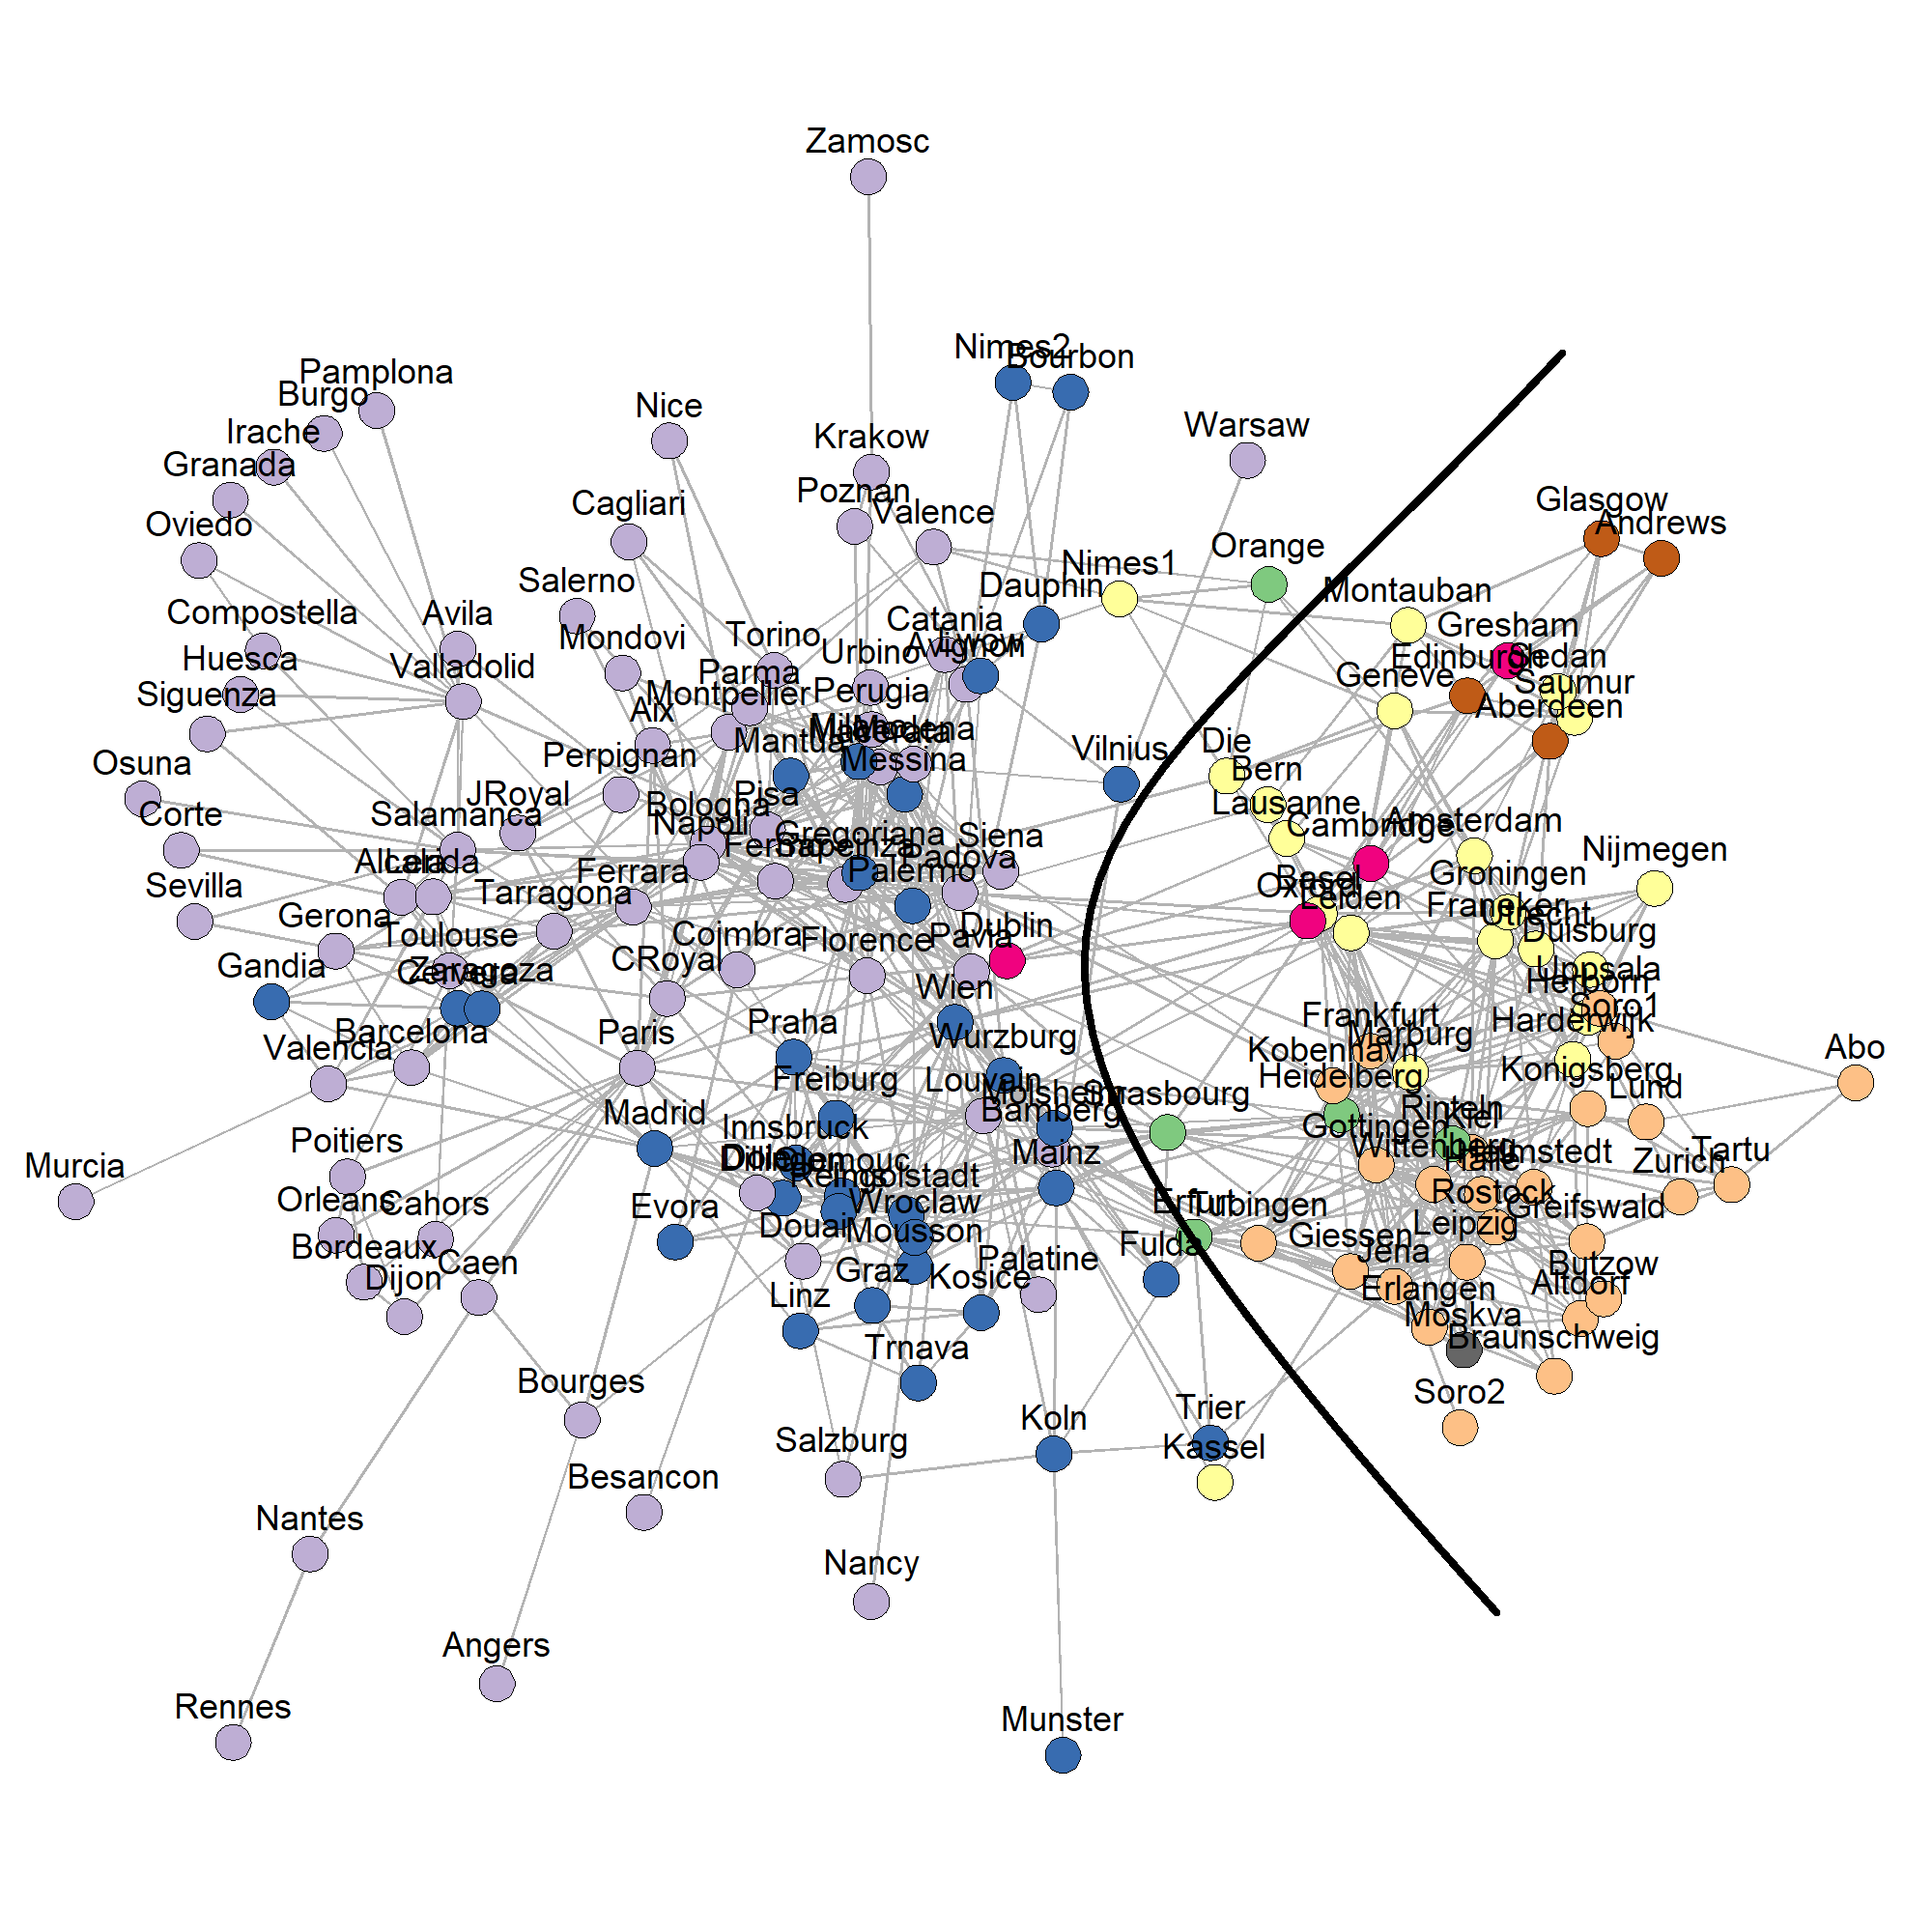 network of universities after the Protestant Reformation